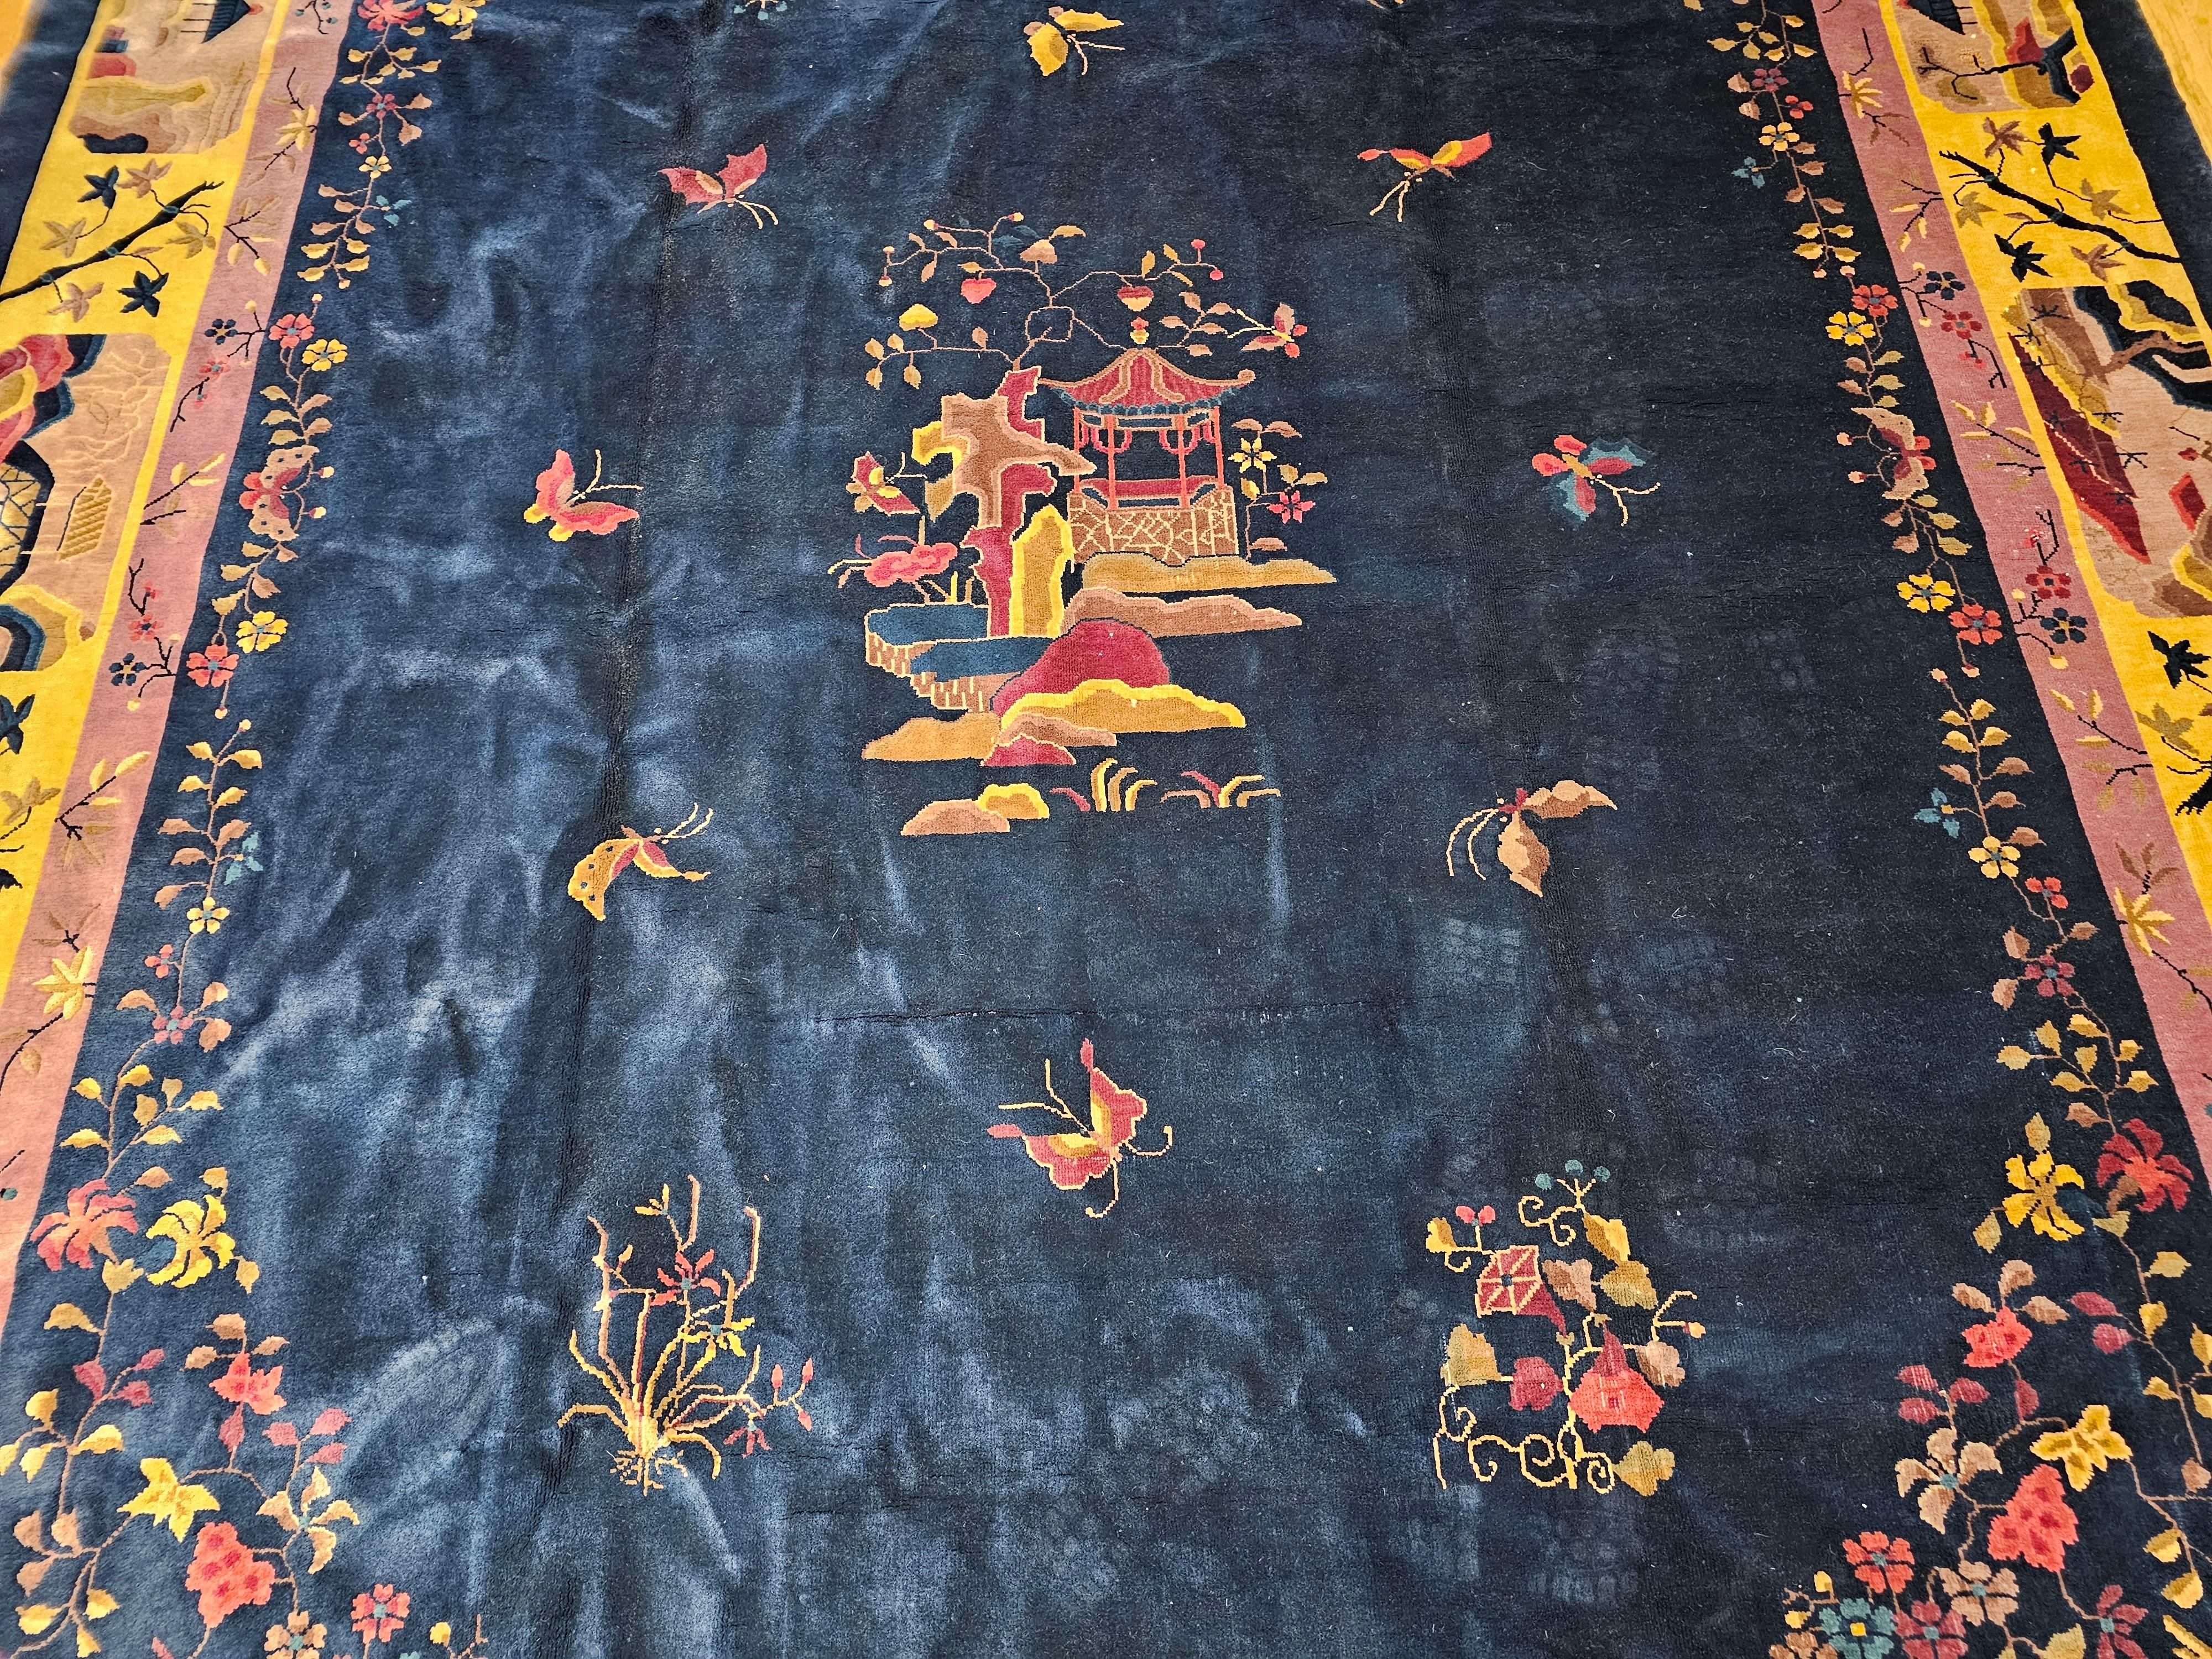 Oversized Walter Nichols Art Deco Chinese Rug in French Blue, Yellow, Navy, Red In Excellent Condition For Sale In Barrington, IL